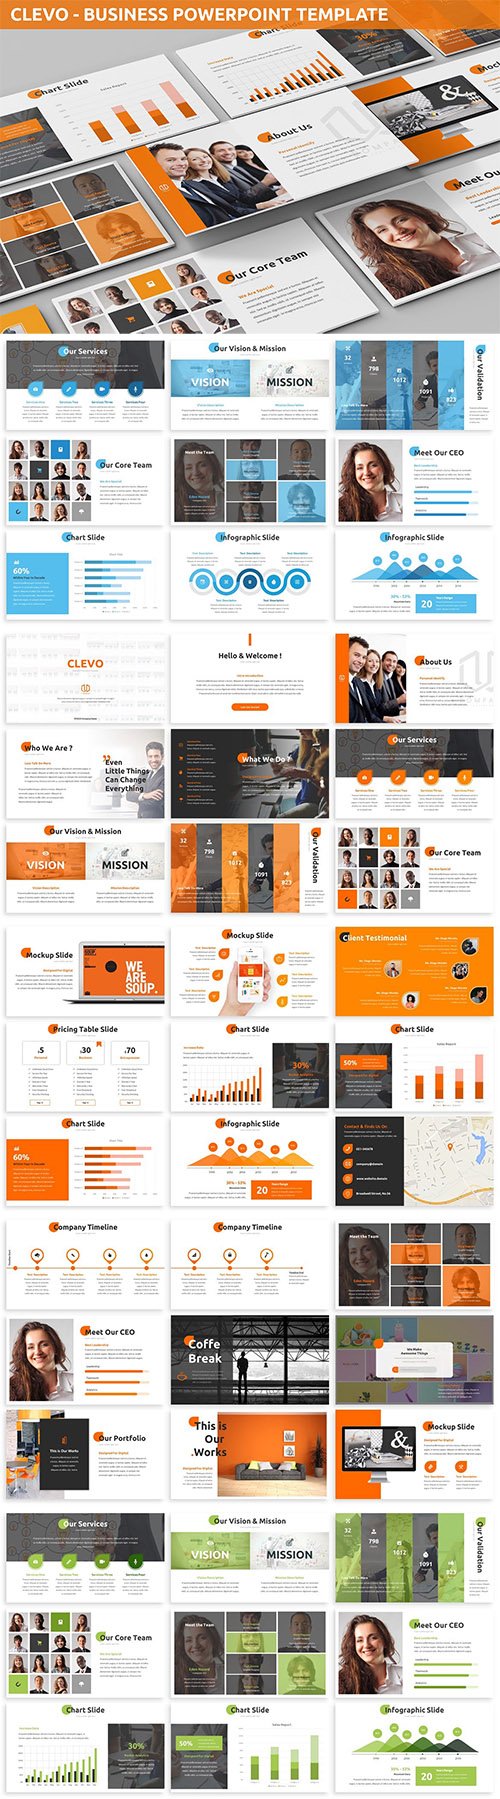 Clevo - Business Powerpoint Template